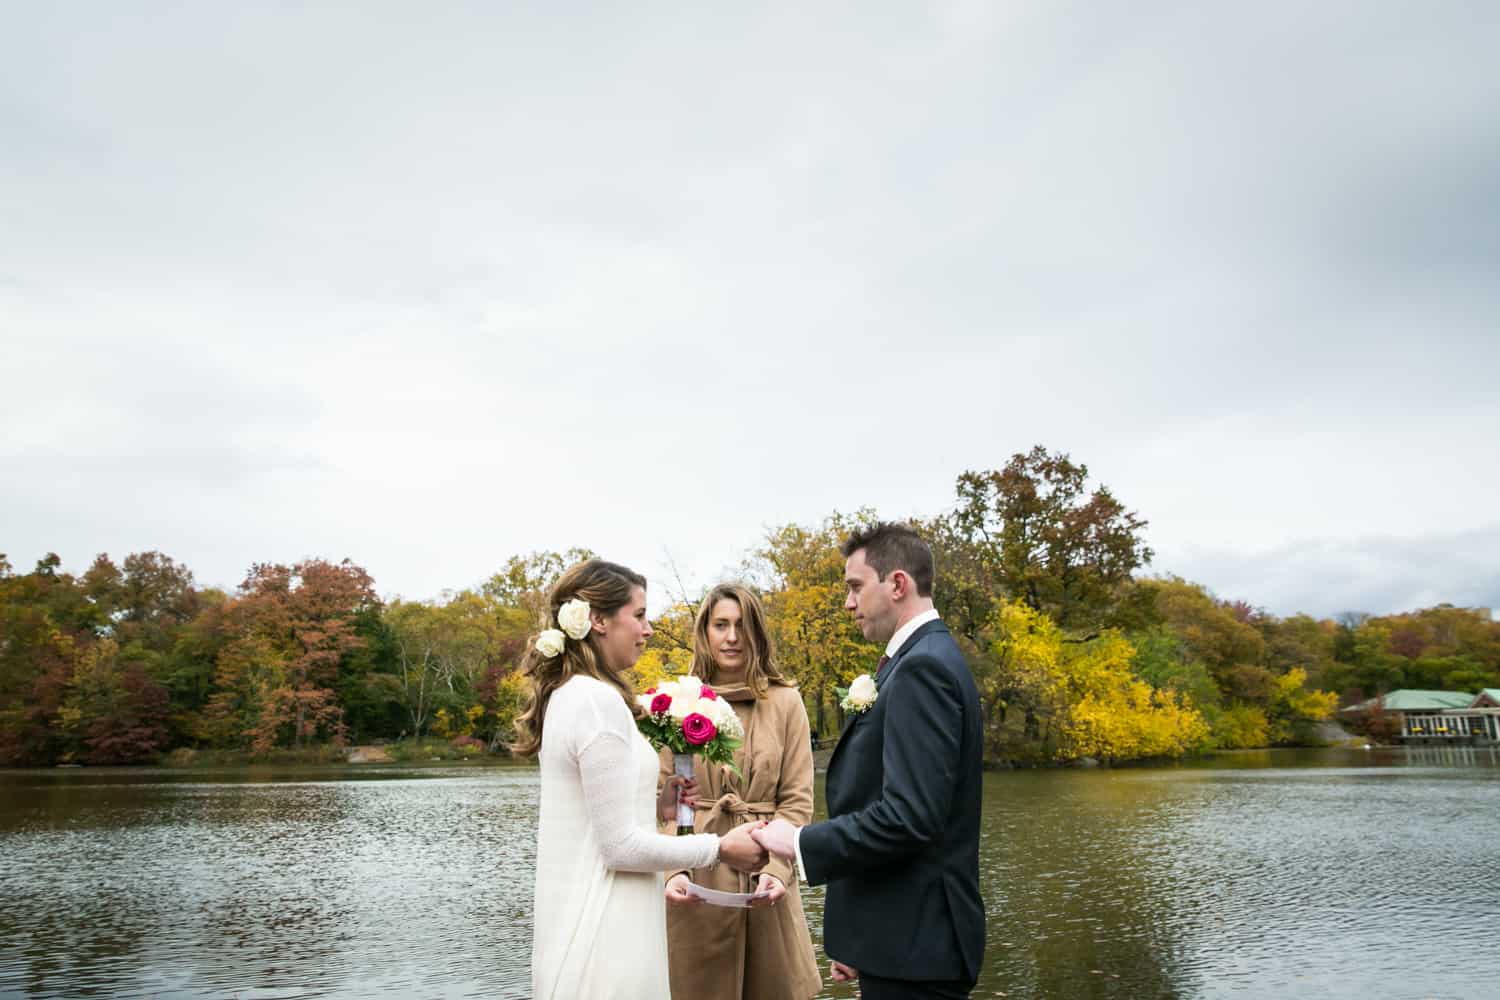 Bride and groom exchanging vows at a Bethesda Fountain wedding in Central Park